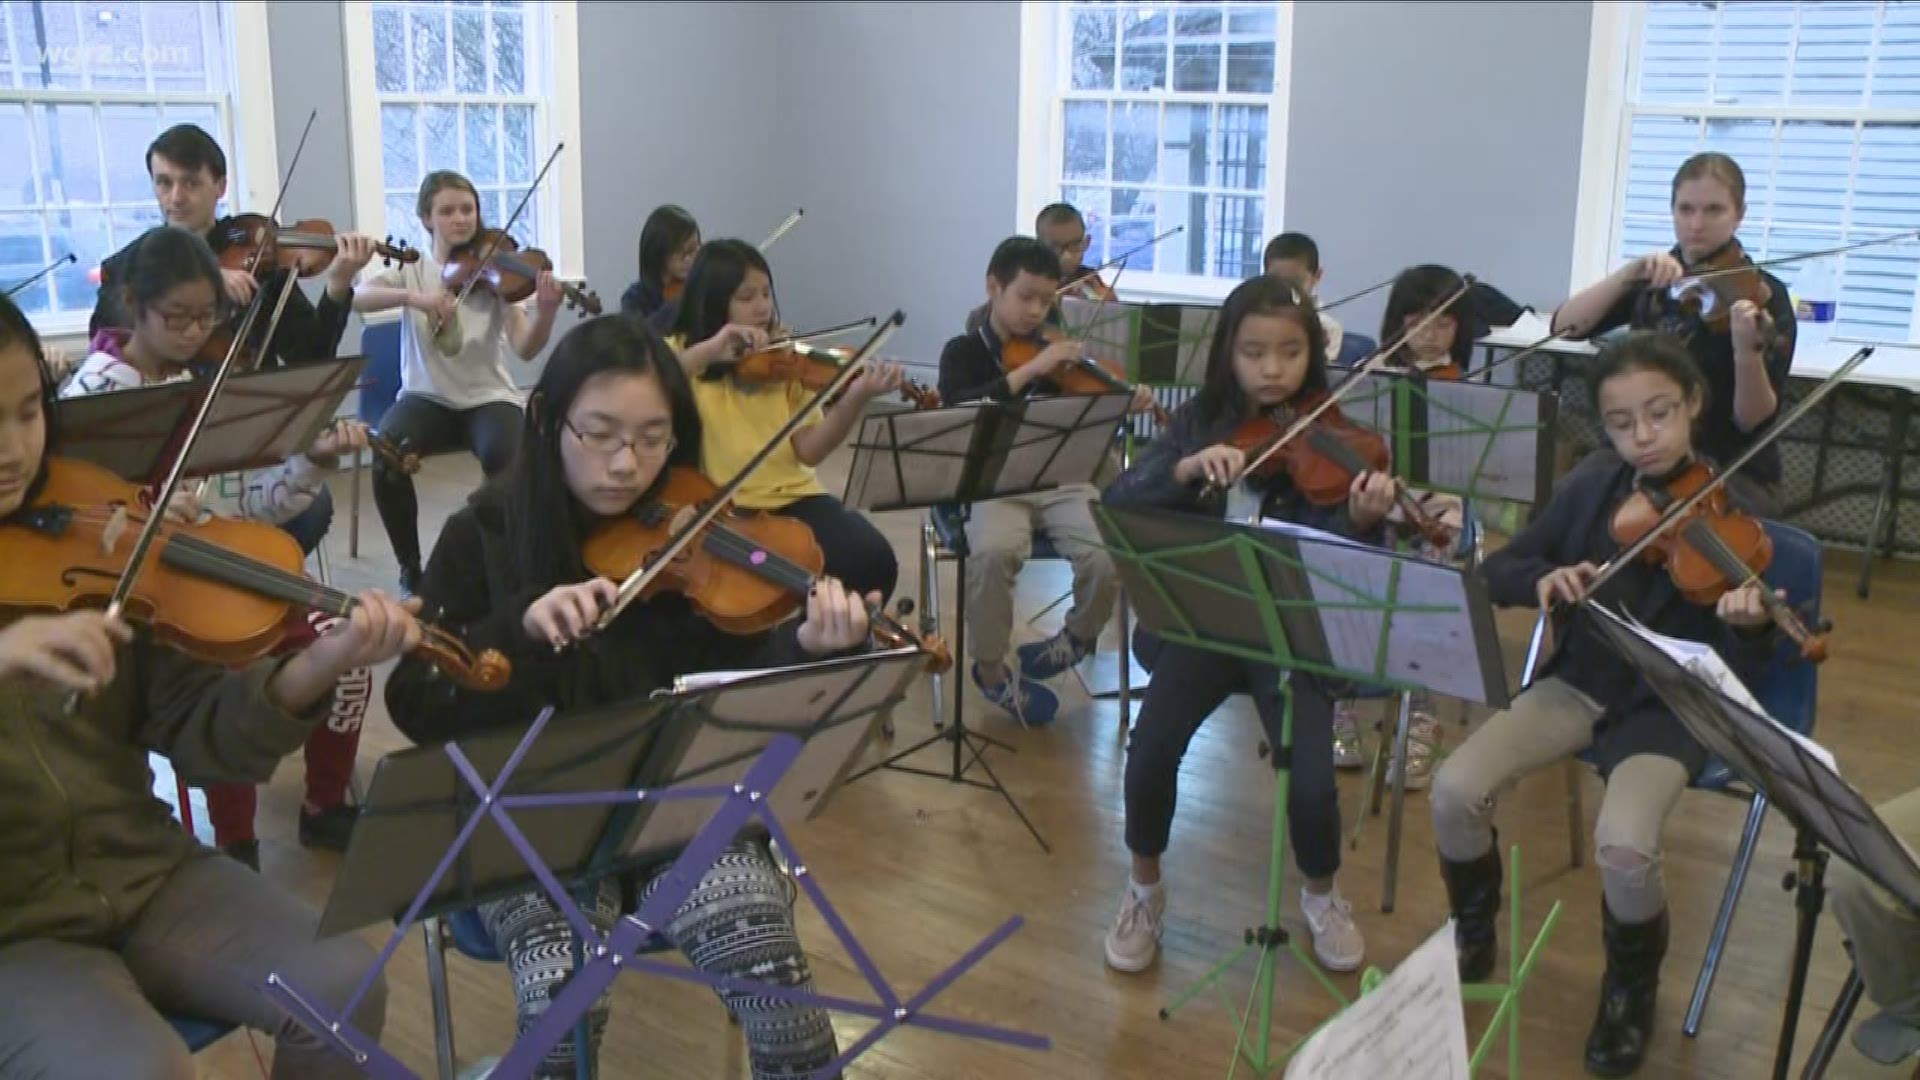 Charity inspires young refugees through musici